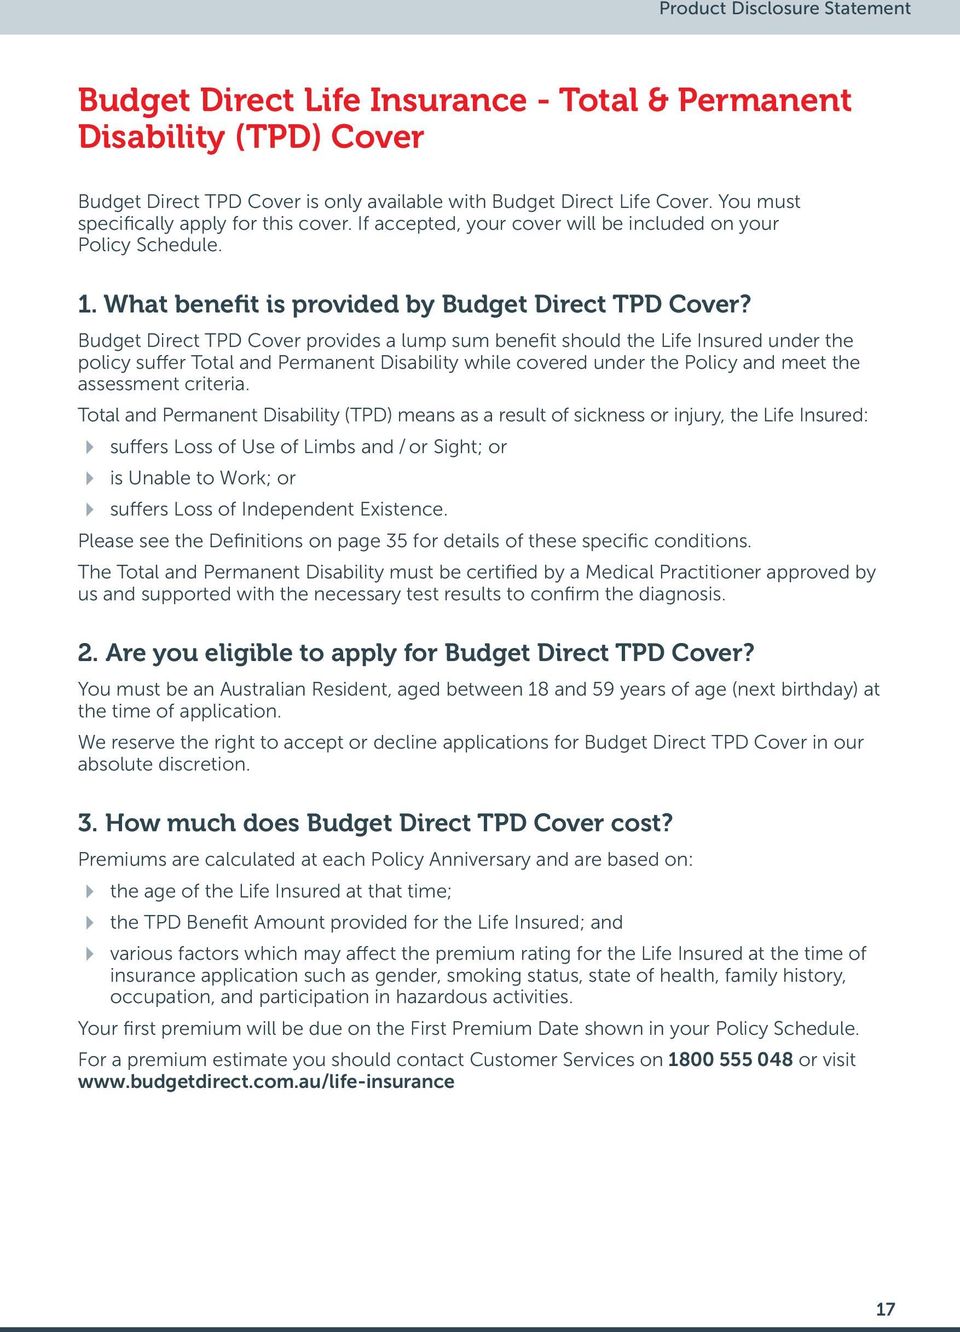 Budget Direct TPD Cover provides a lump sum benefit should the Life Insured under the policy suffer Total and Permanent Disability while covered under the Policy and meet the assessment criteria.